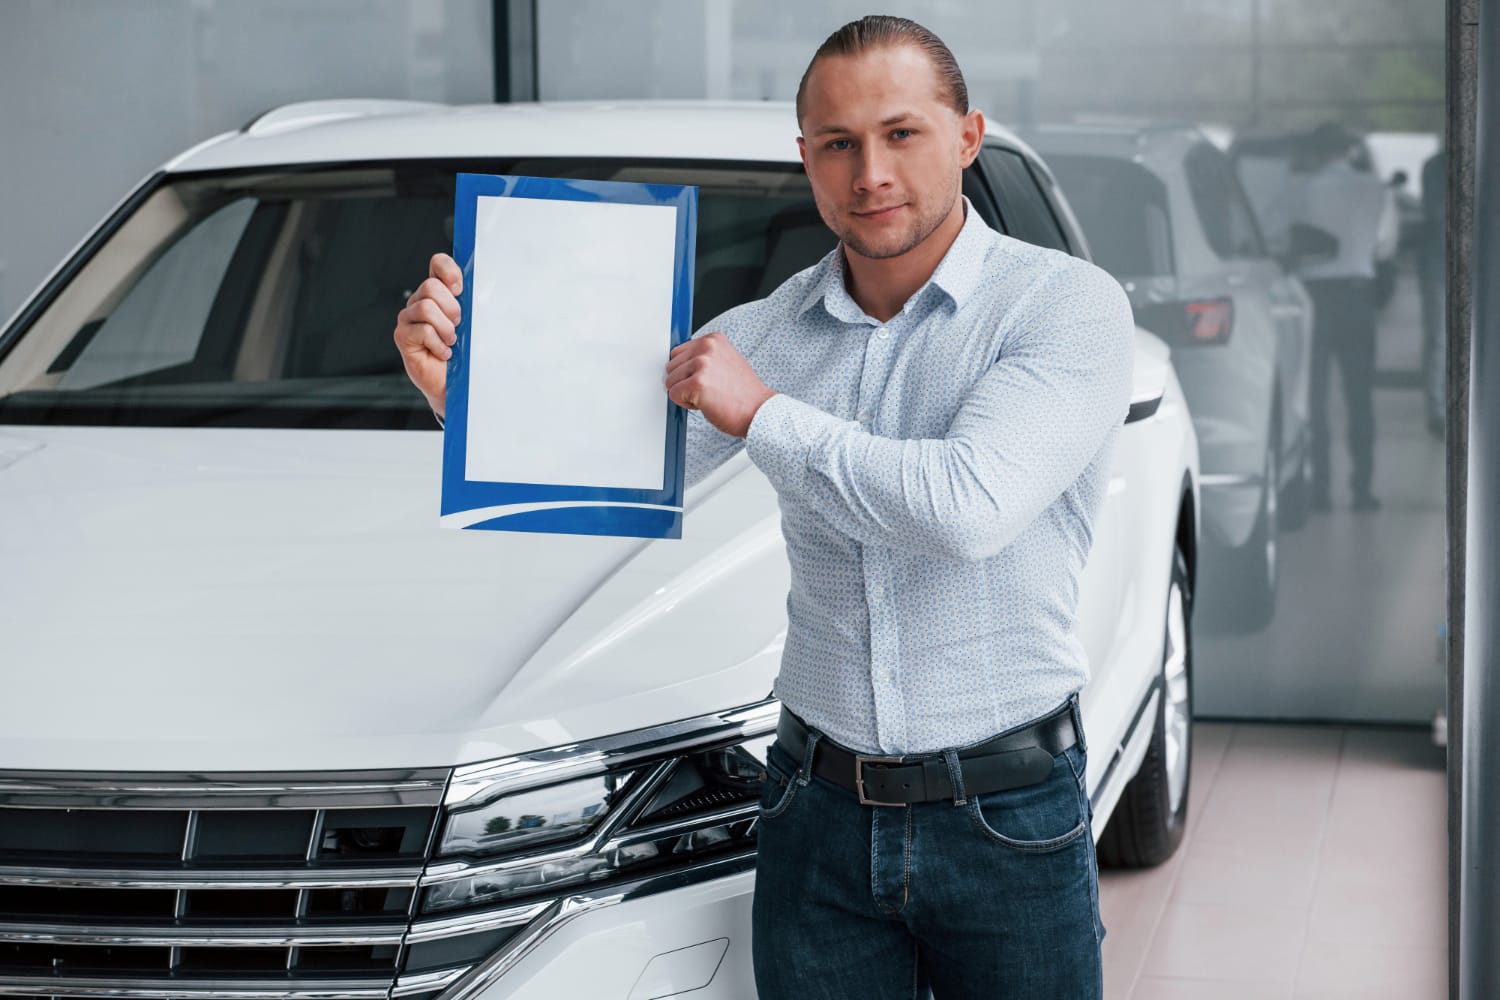 important-document-manager-stands-in-front-of-modern-white-car-with-paper-in-hands (1)